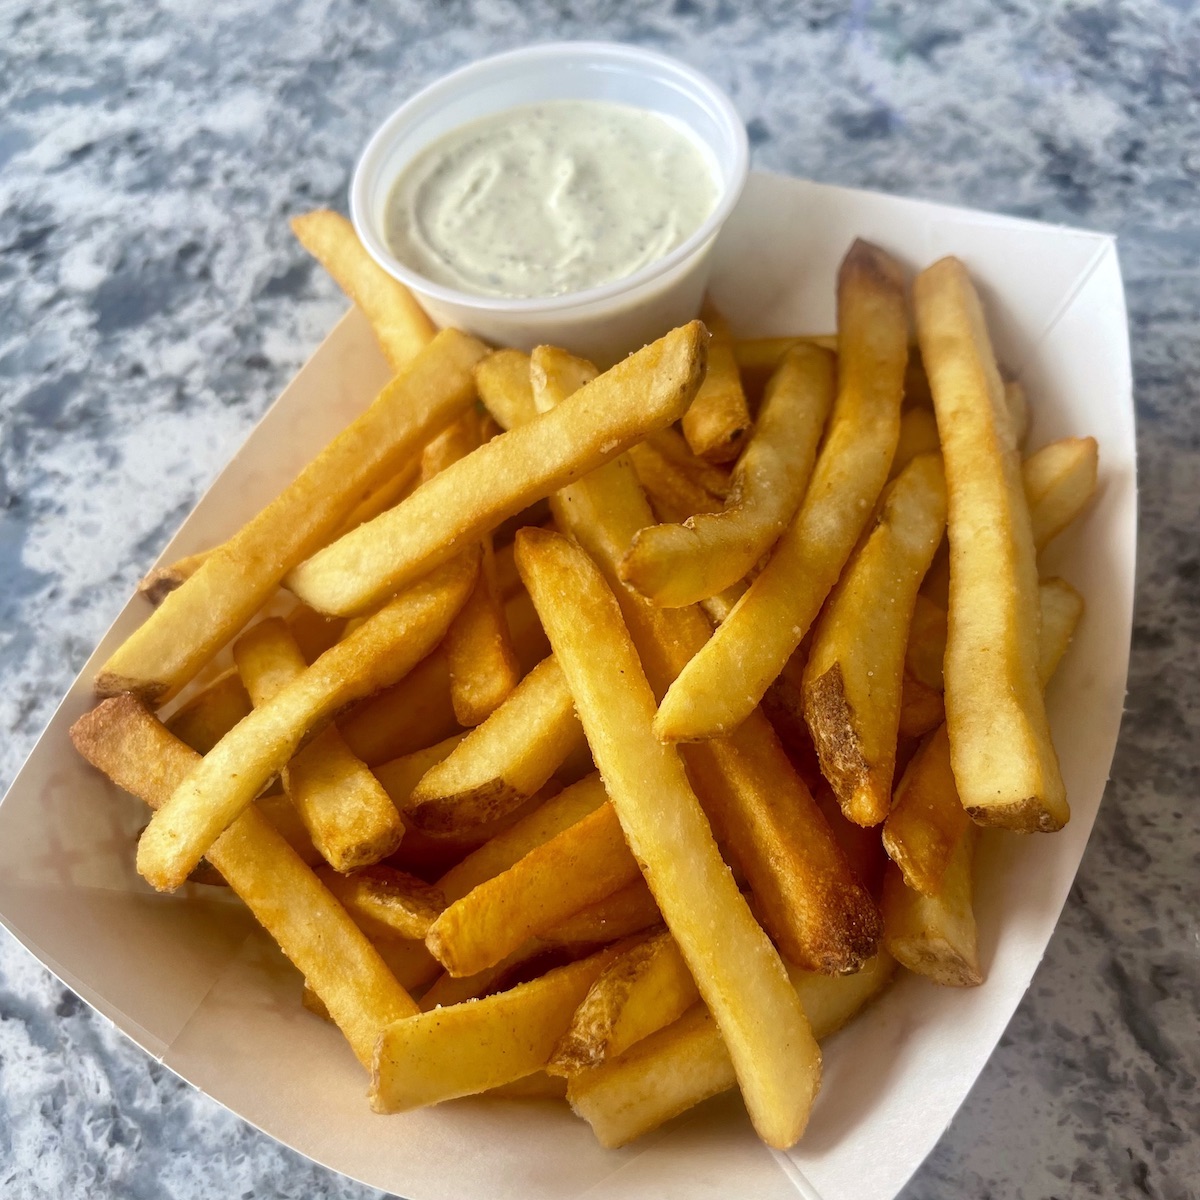 Fresh-cut Fries with Housemade Ranch Sauce from PZZA in Boca Raton, Florida